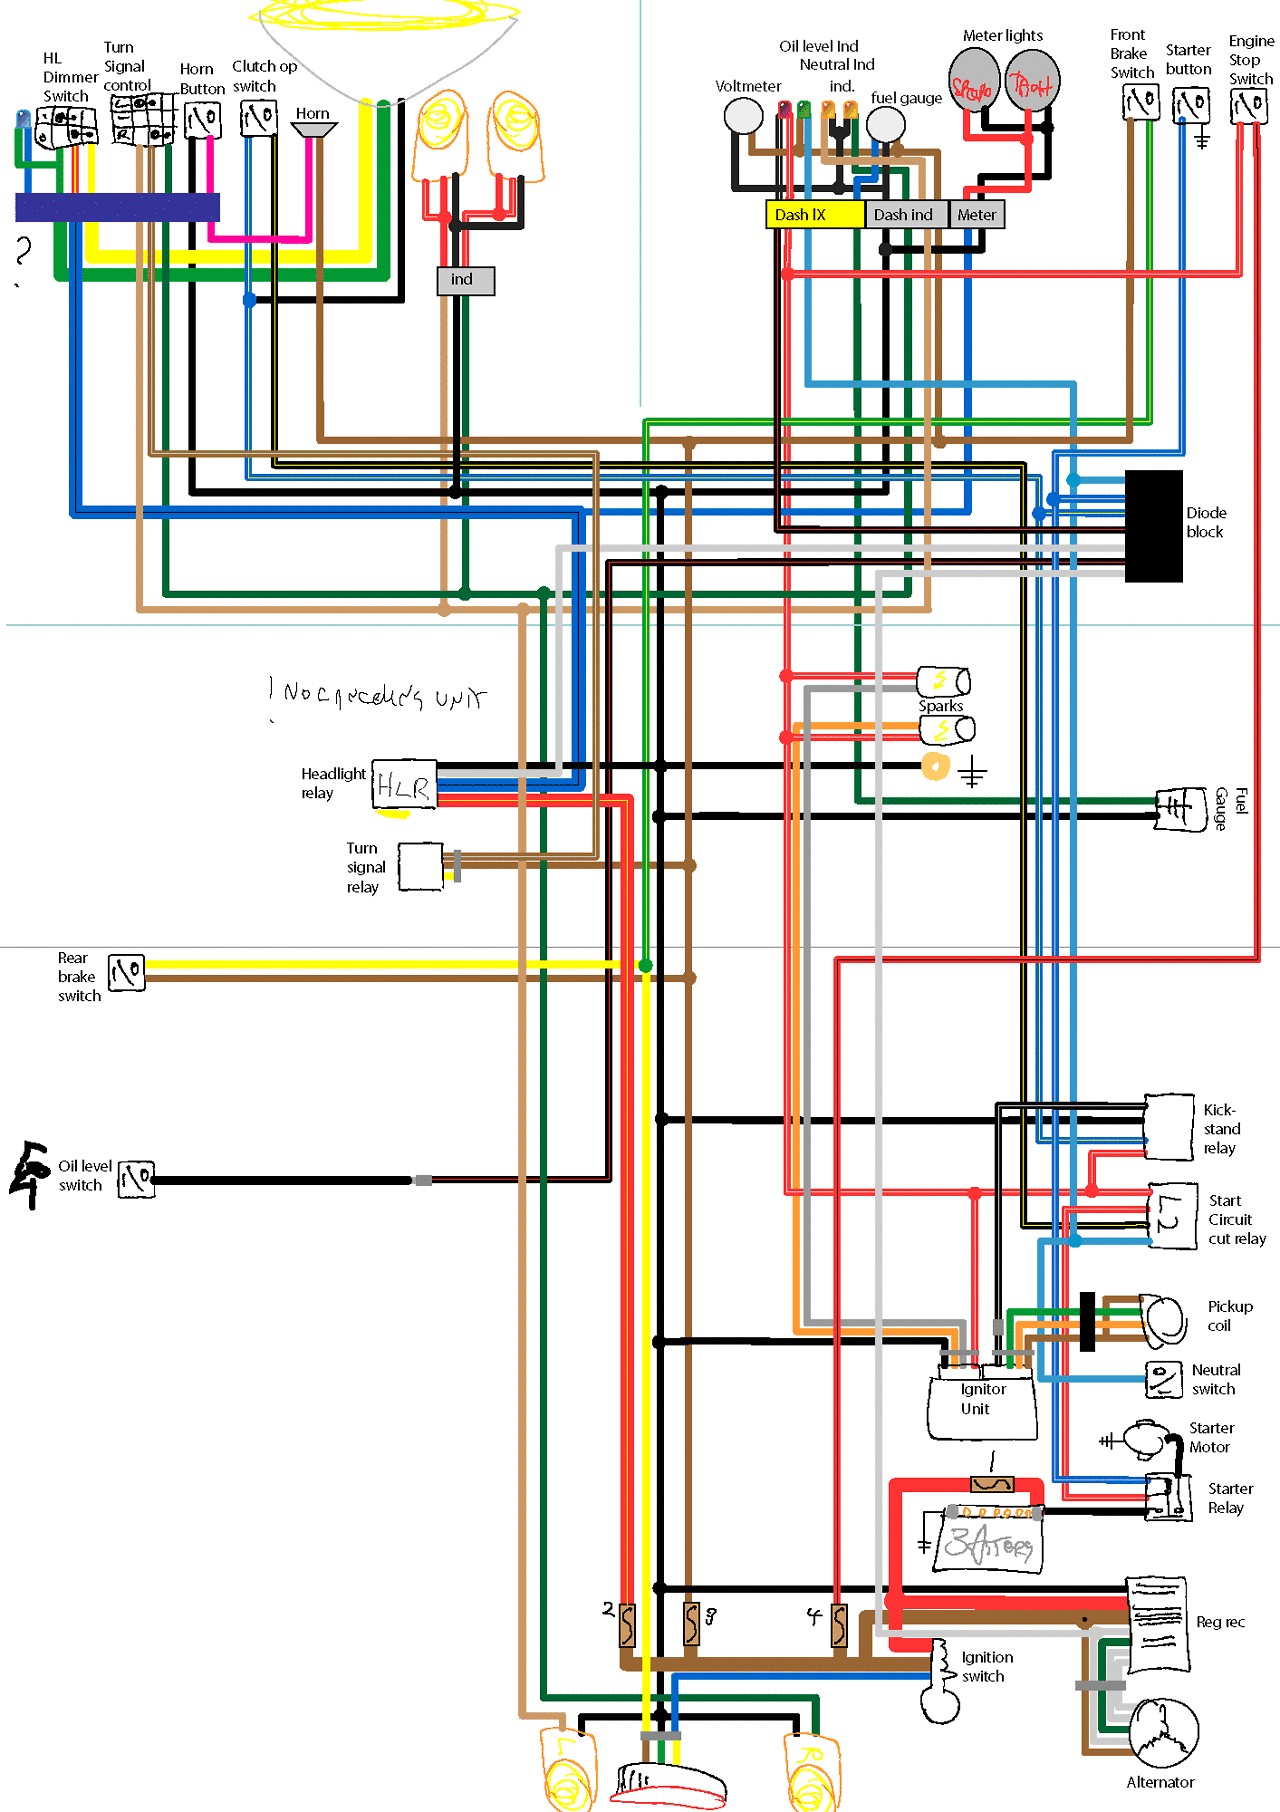 Engine Oiling Diagram Land Rover Discovery Wiring Diagram Of Engine Oiling Diagram